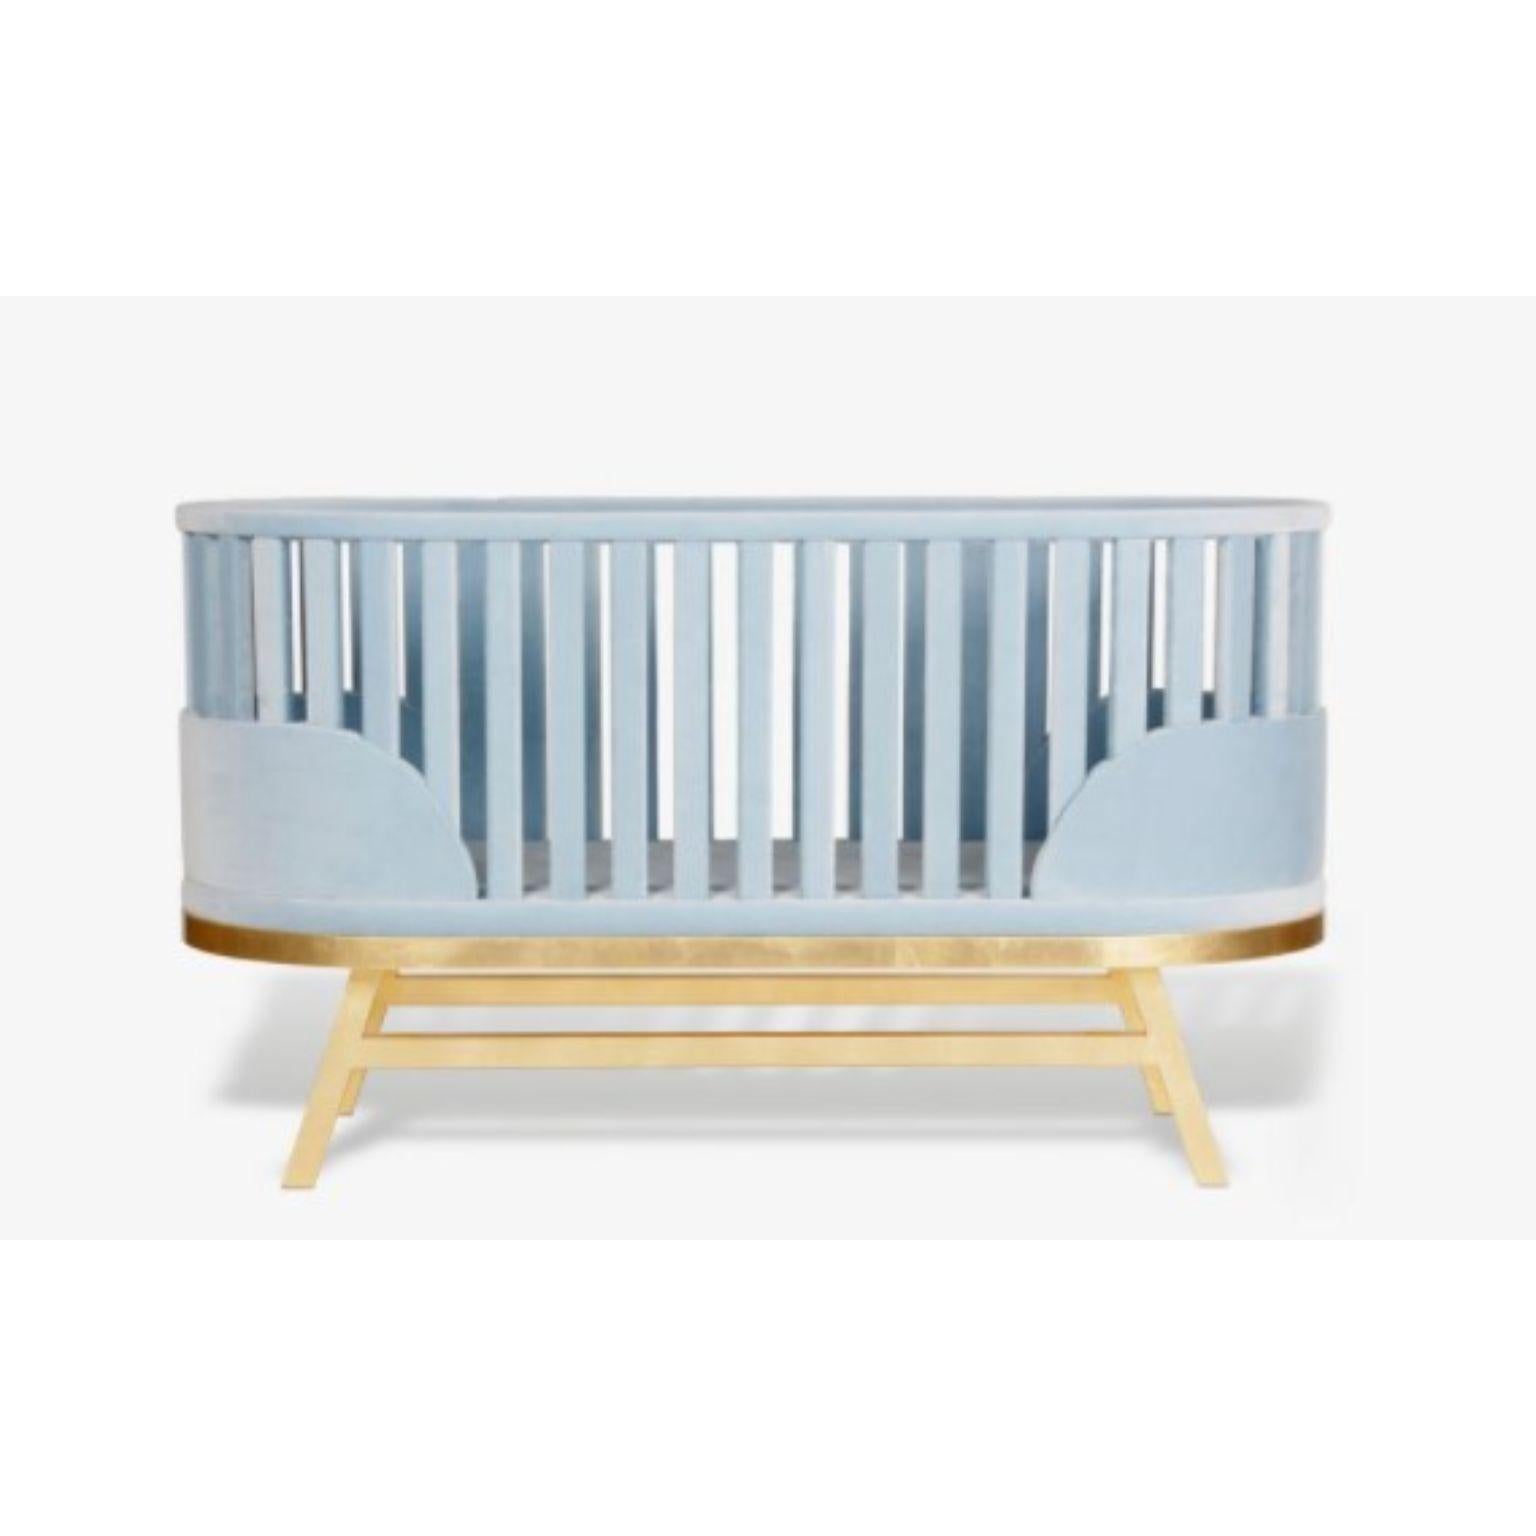 Prince santi bed by Royal Stranger
Dimensions: D156 x W70 x H88 cm
Materials: Sky cotton velvet, gold leafcoated wood with glossy finish.
Weight: 55 kg

Finish Options:
Upholstery available in Royal Stranger’s cotton velvet.
Available in COM